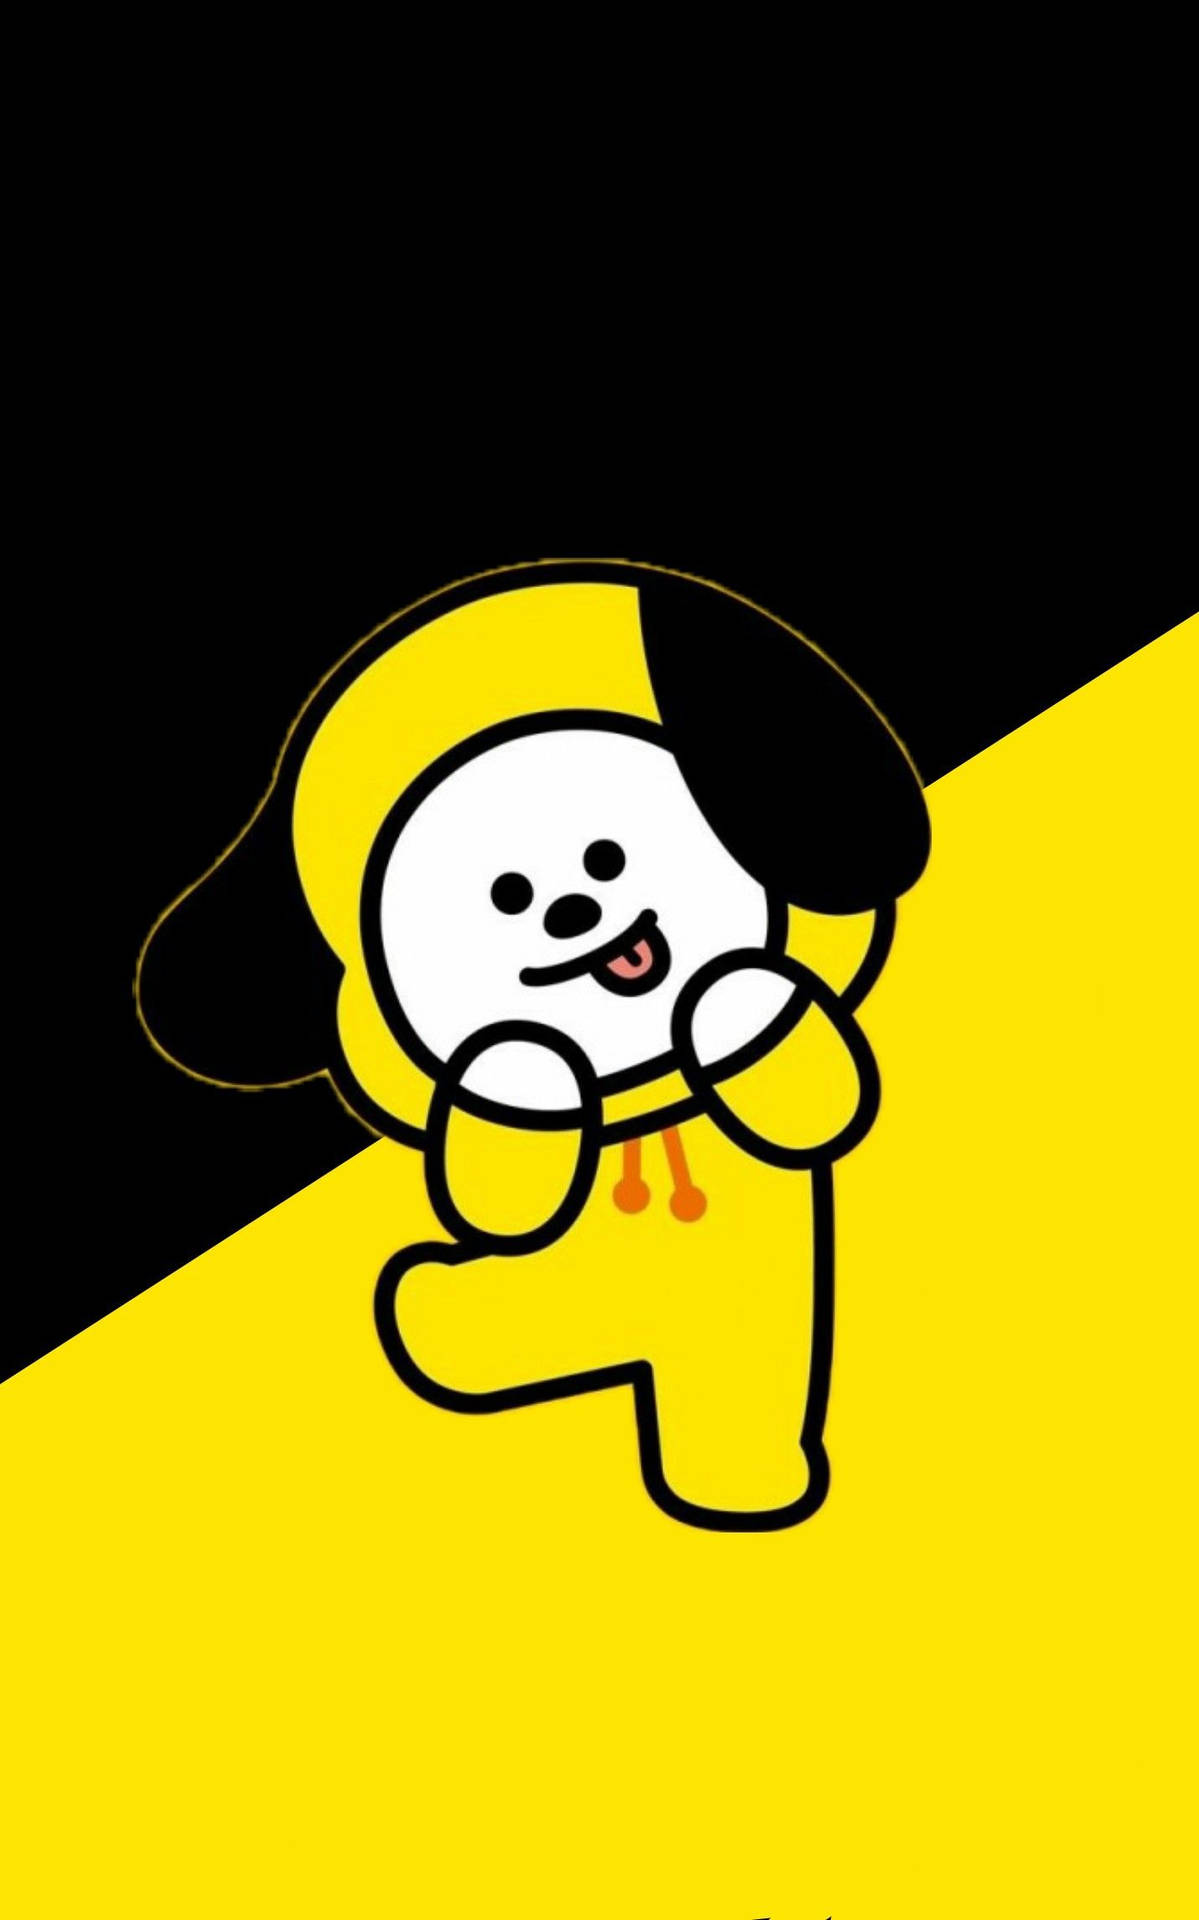 100+] Chimmy Bt21 Wallpapers | Wallpapers.Com